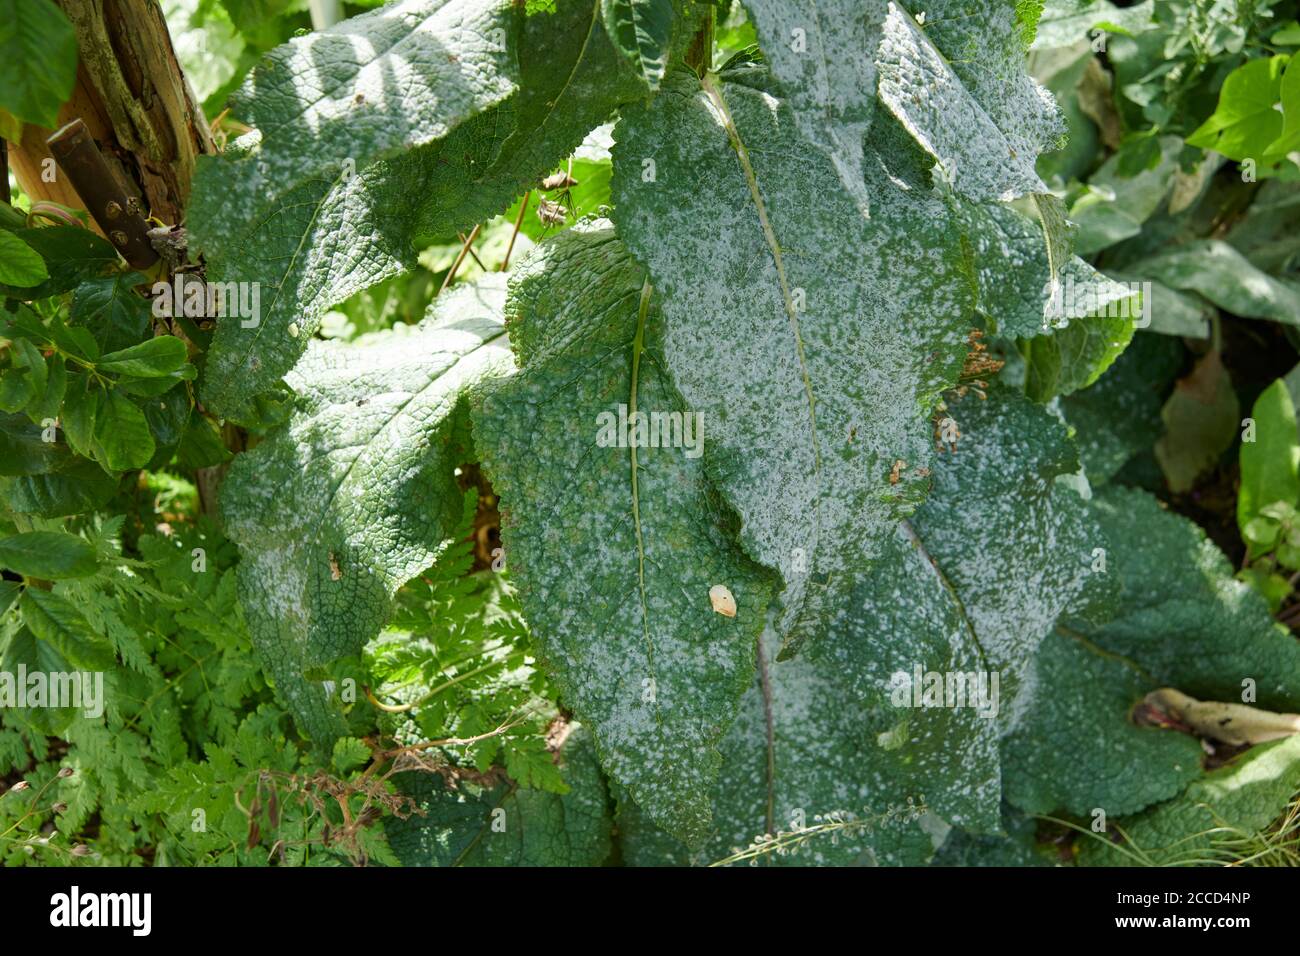 Powdery mildew on the leaves of an infected plant. , East Yorkshire England, UK, GB, Stock Photo